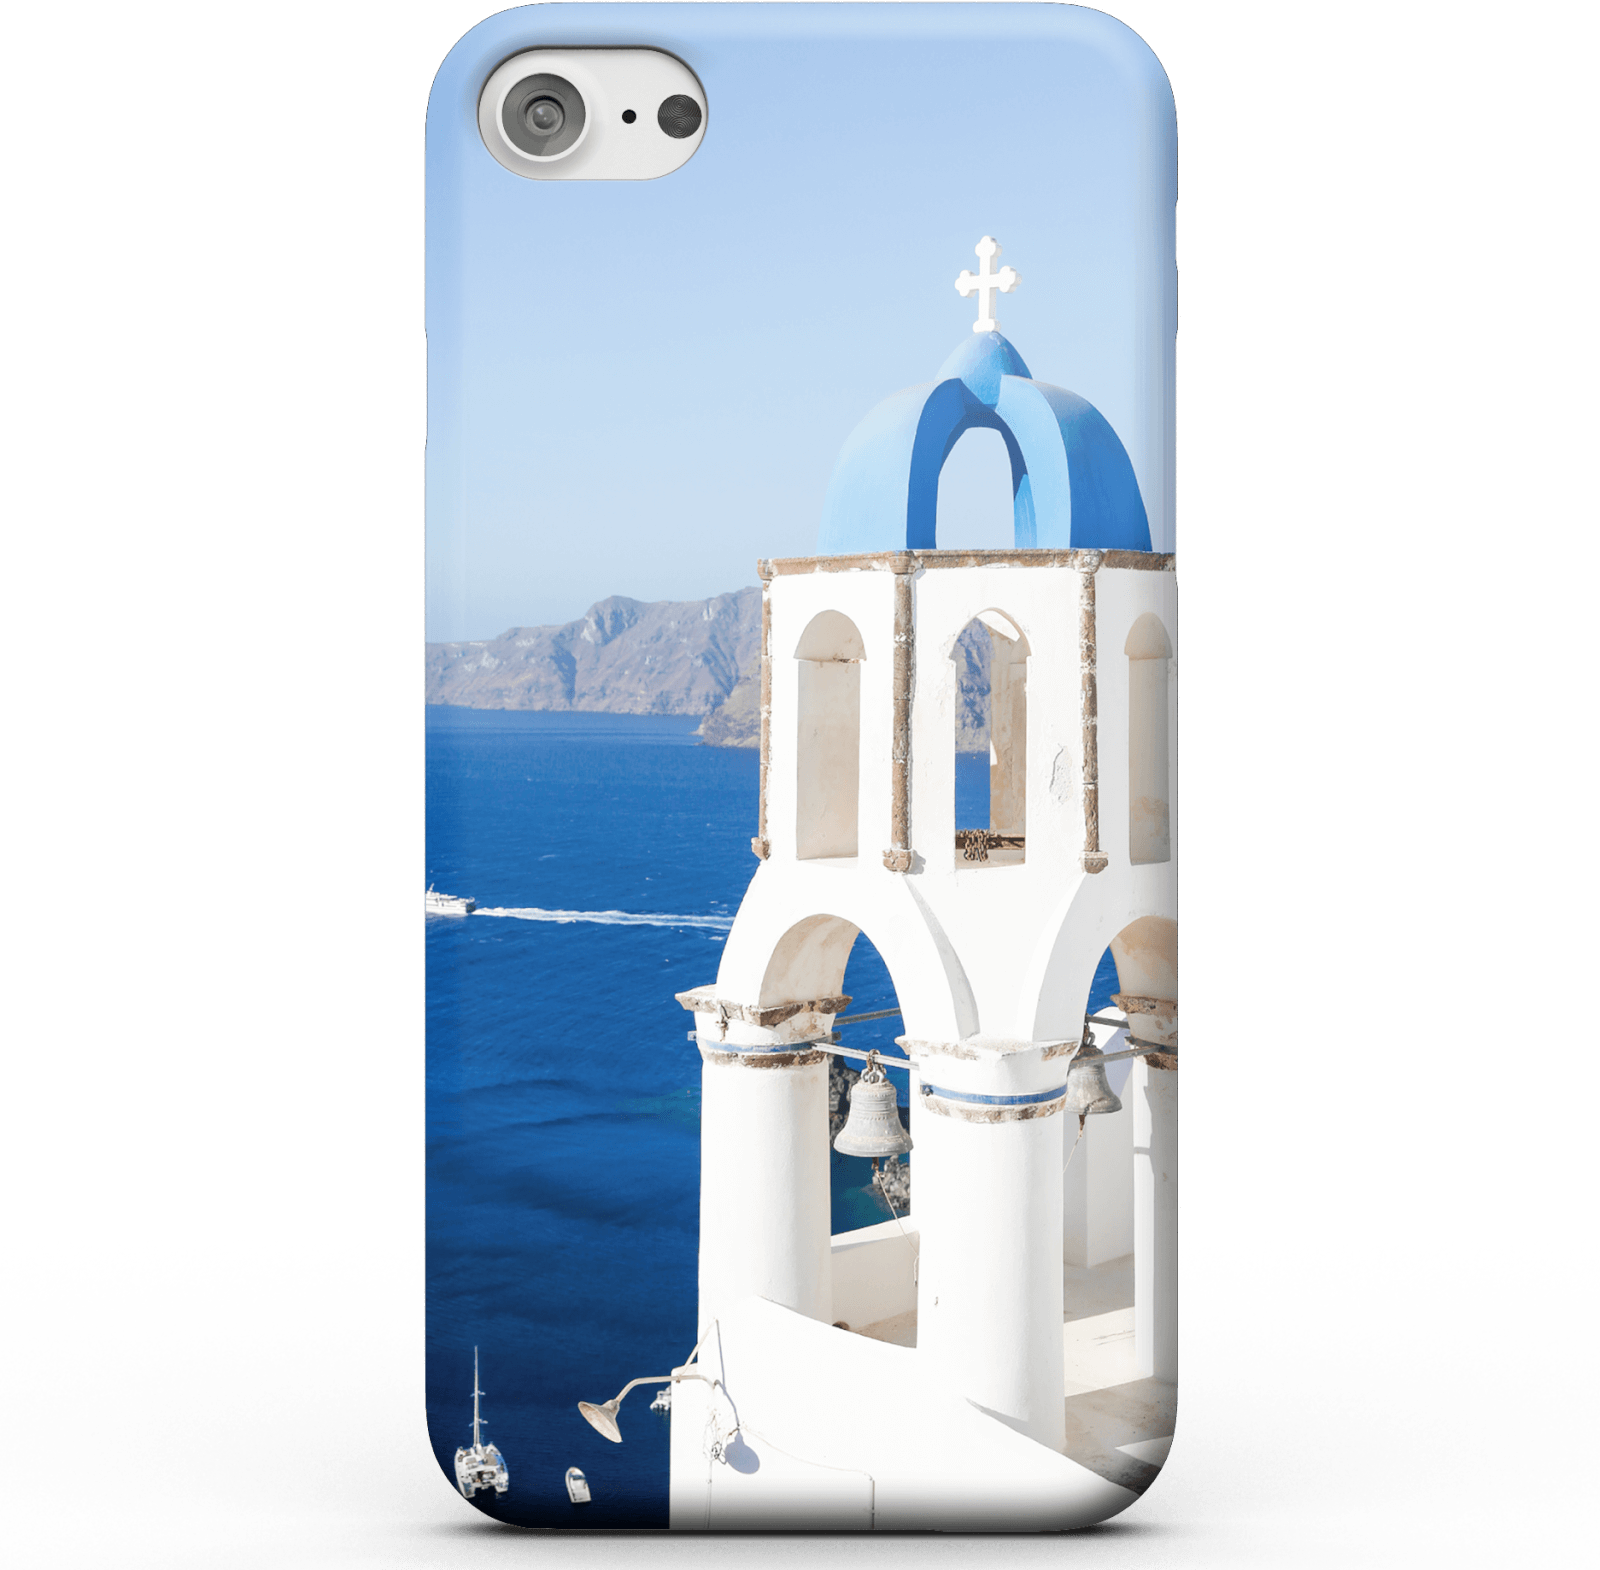 Santorini Steeple Phone Case for iPhone and Android - iPhone 5/5s - Snap Case - Matte